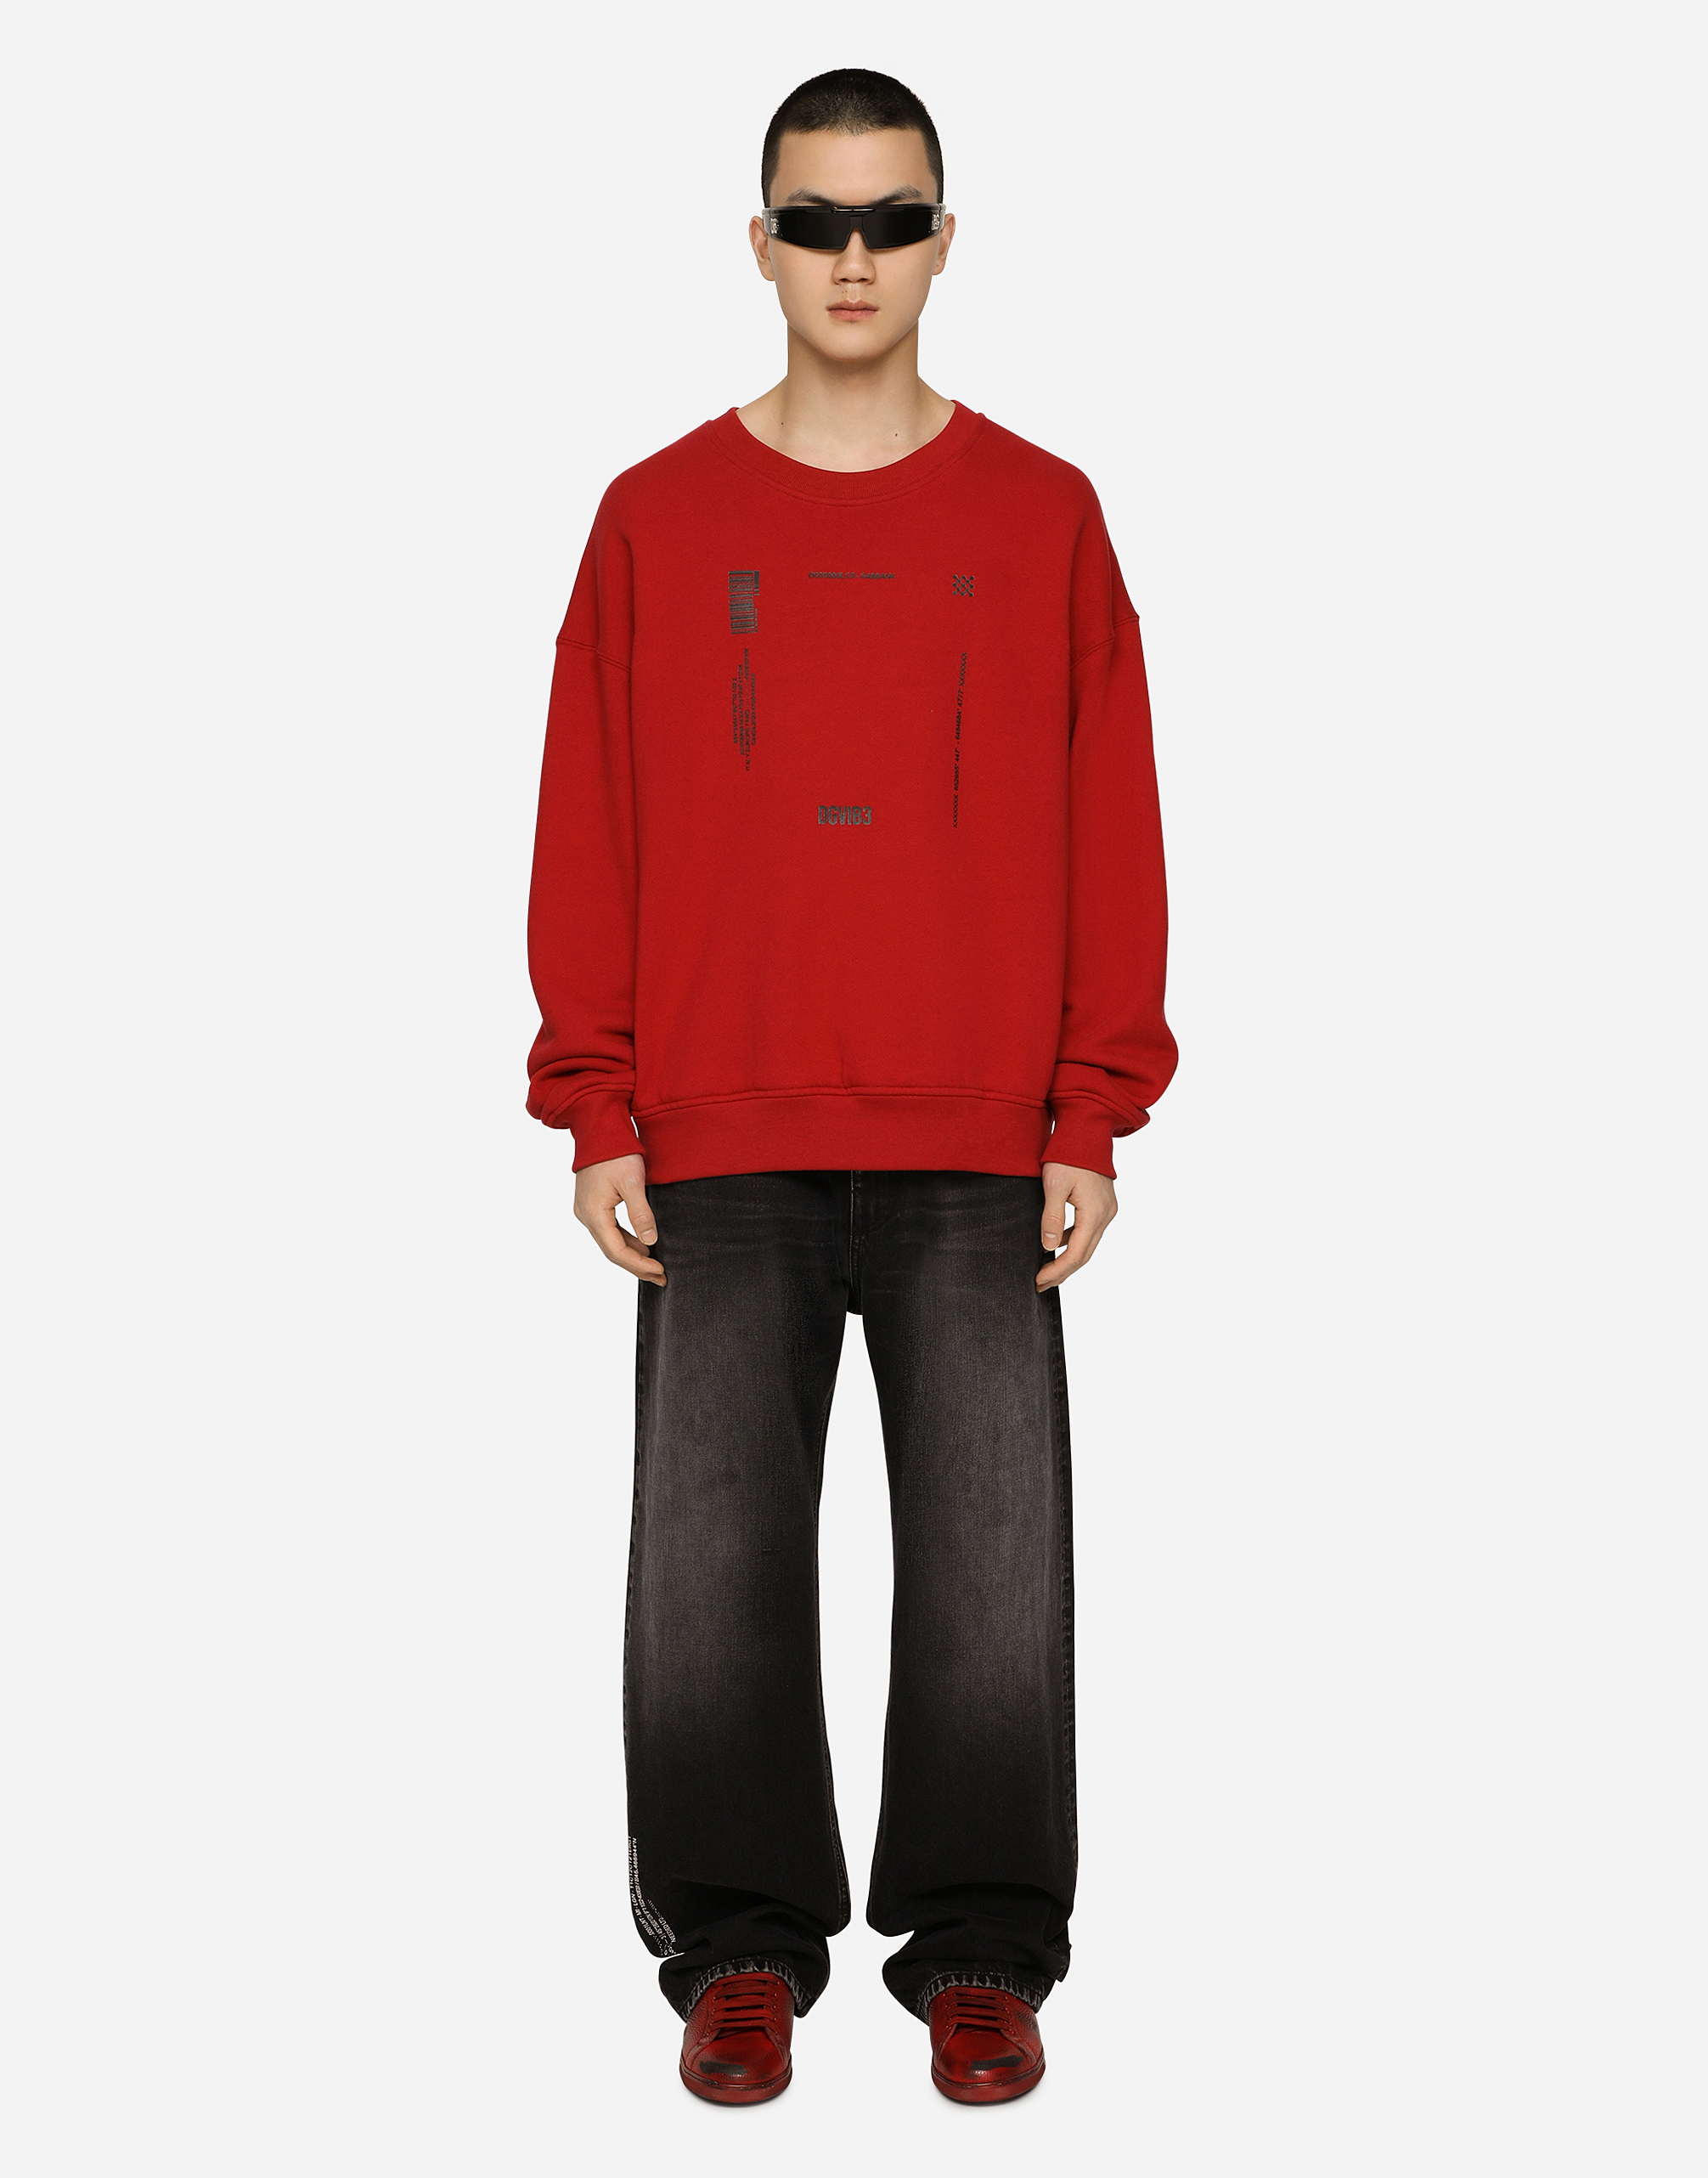 Dolce & Gabbana Jersey Sweatshirt With Dg Vib3 Print And Logo In Red